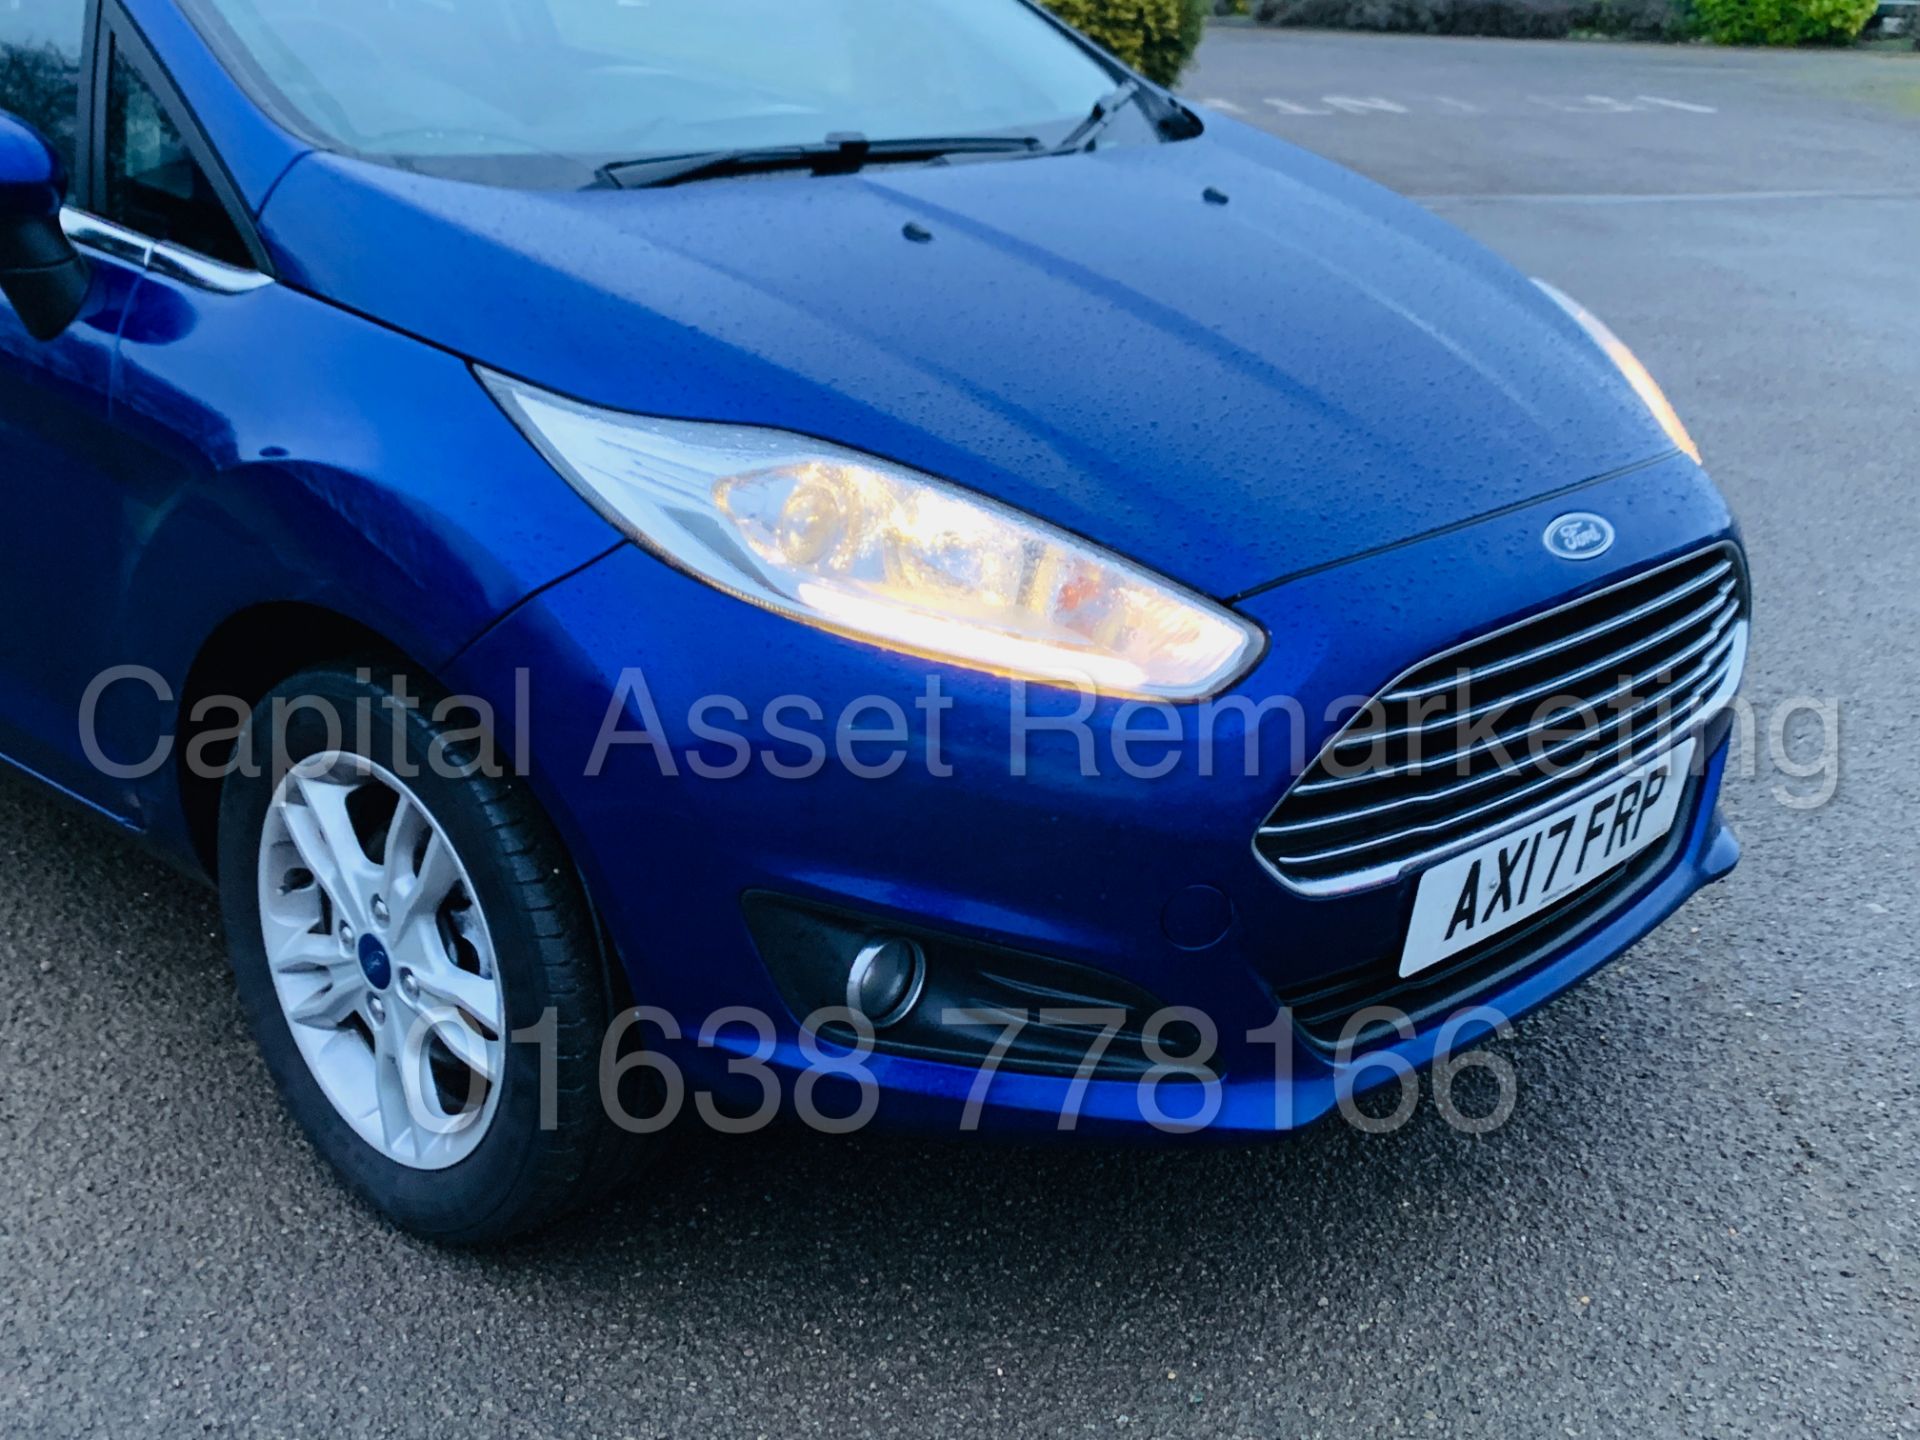 (On Sale) FORD FIESTA *ZETEC EDITION* (2017) '1.2 PETROL - 5 SPEED' *AIR CON & SAT NAV* 17,000 MILES - Image 13 of 40